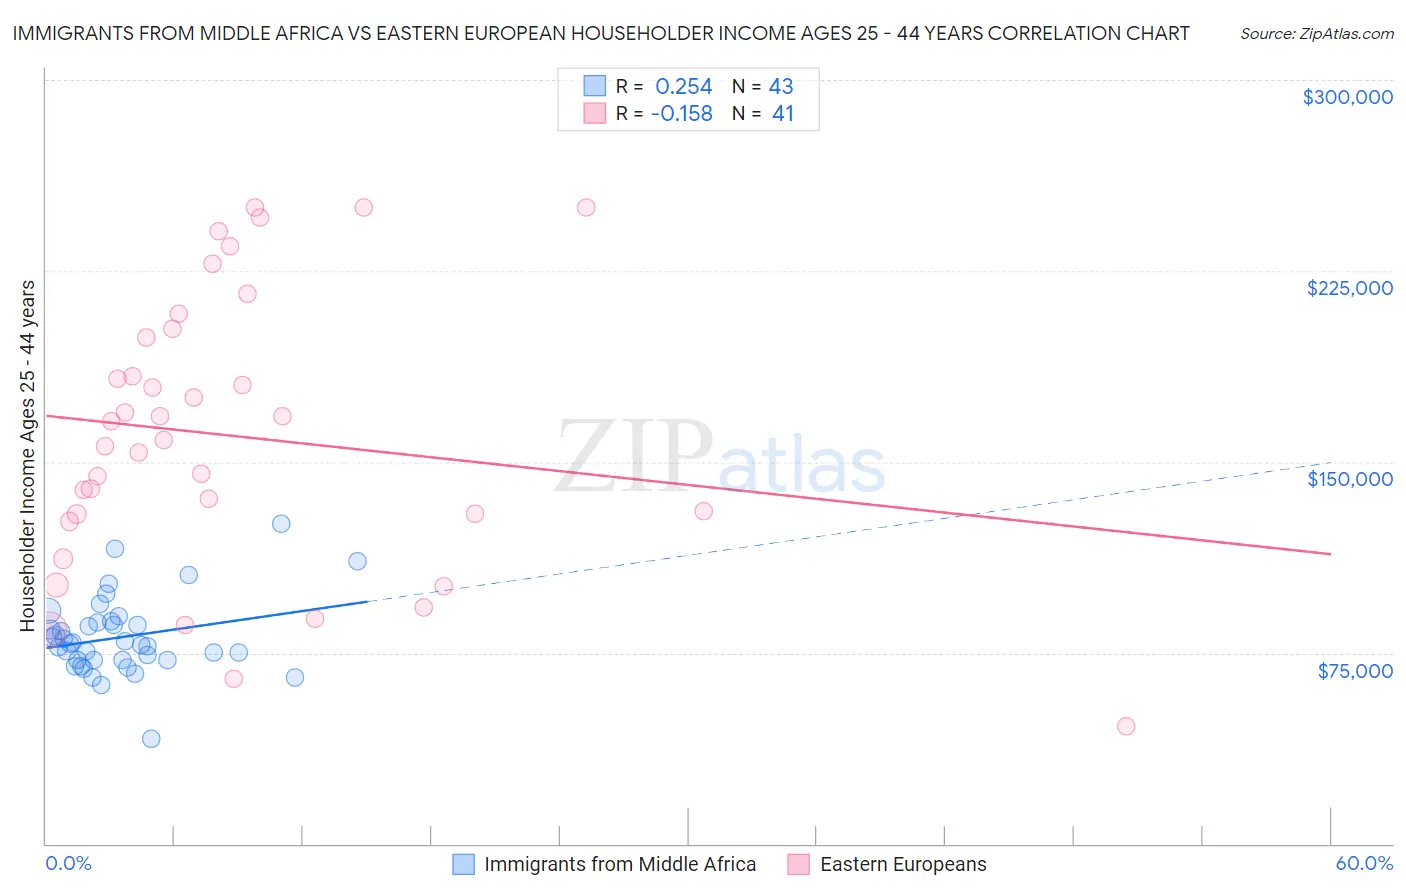 Immigrants from Middle Africa vs Eastern European Householder Income Ages 25 - 44 years